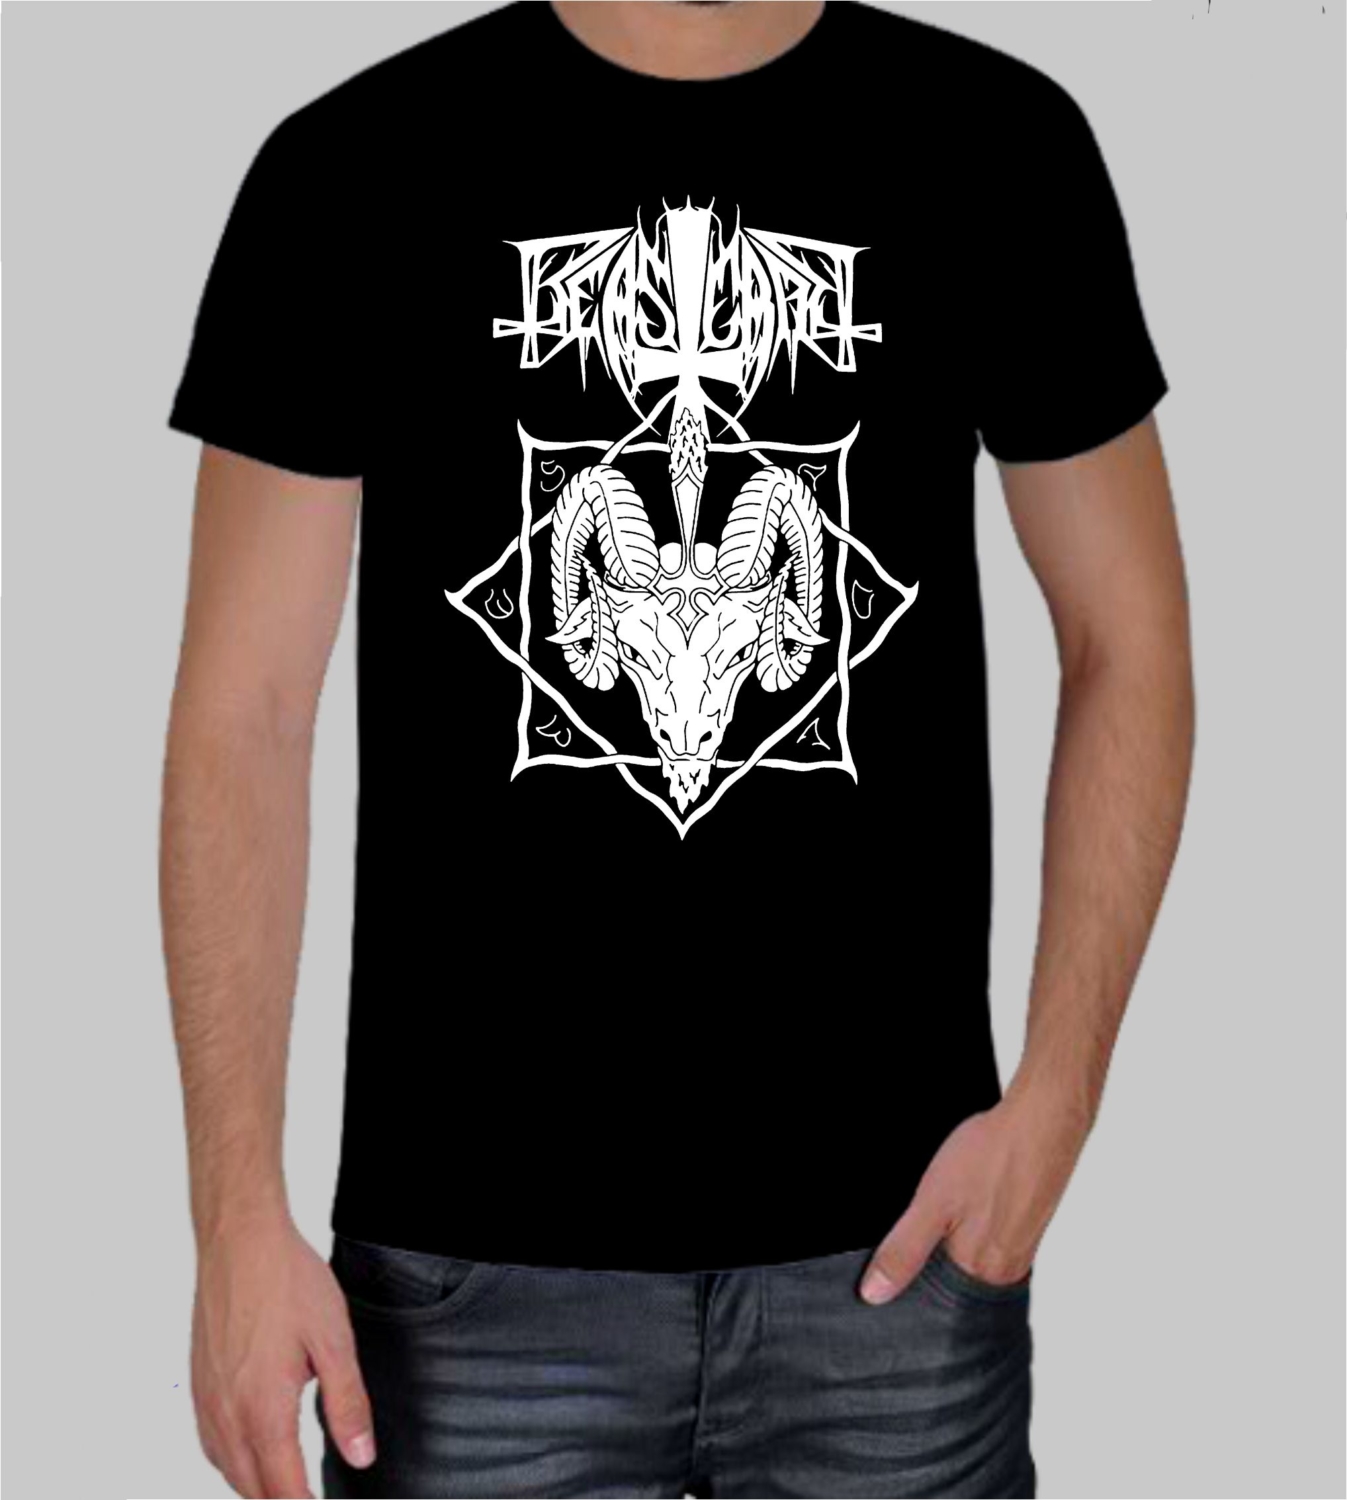 Beastcraft T-Shirt – Metal & Rock T-shirts and Accessories